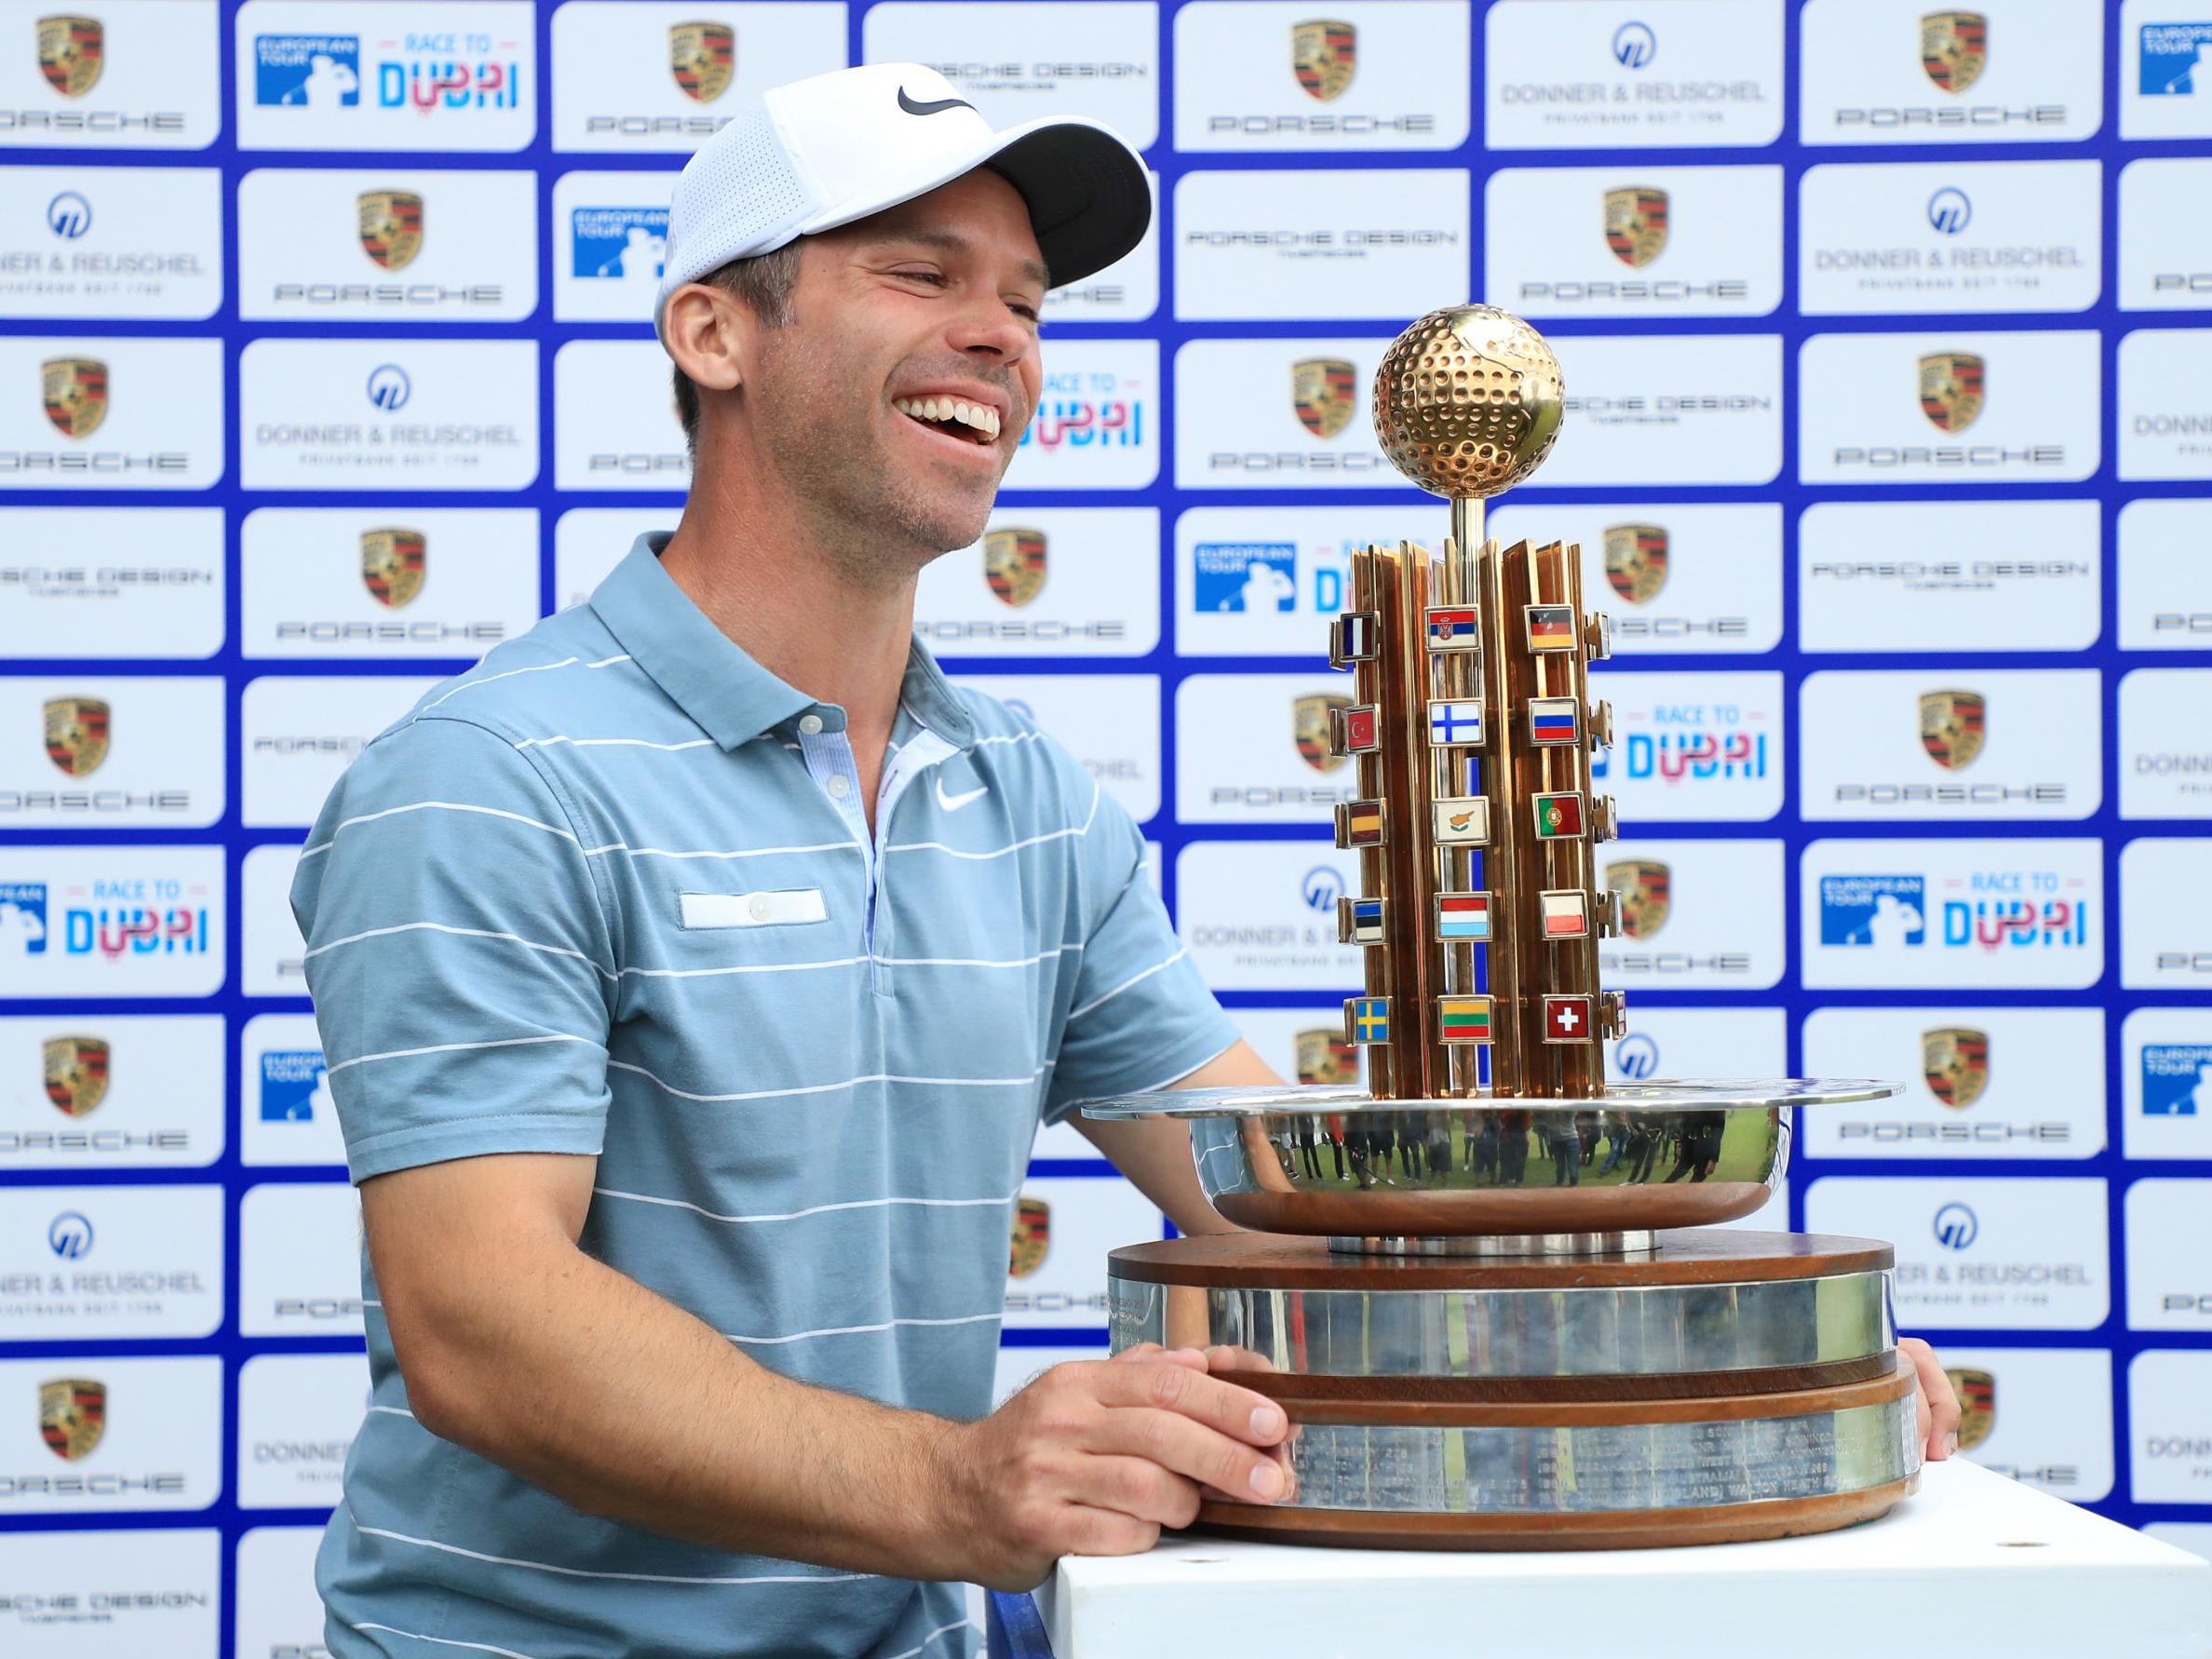 Paul Casey ends five-year wait for a win with success in Hamburg